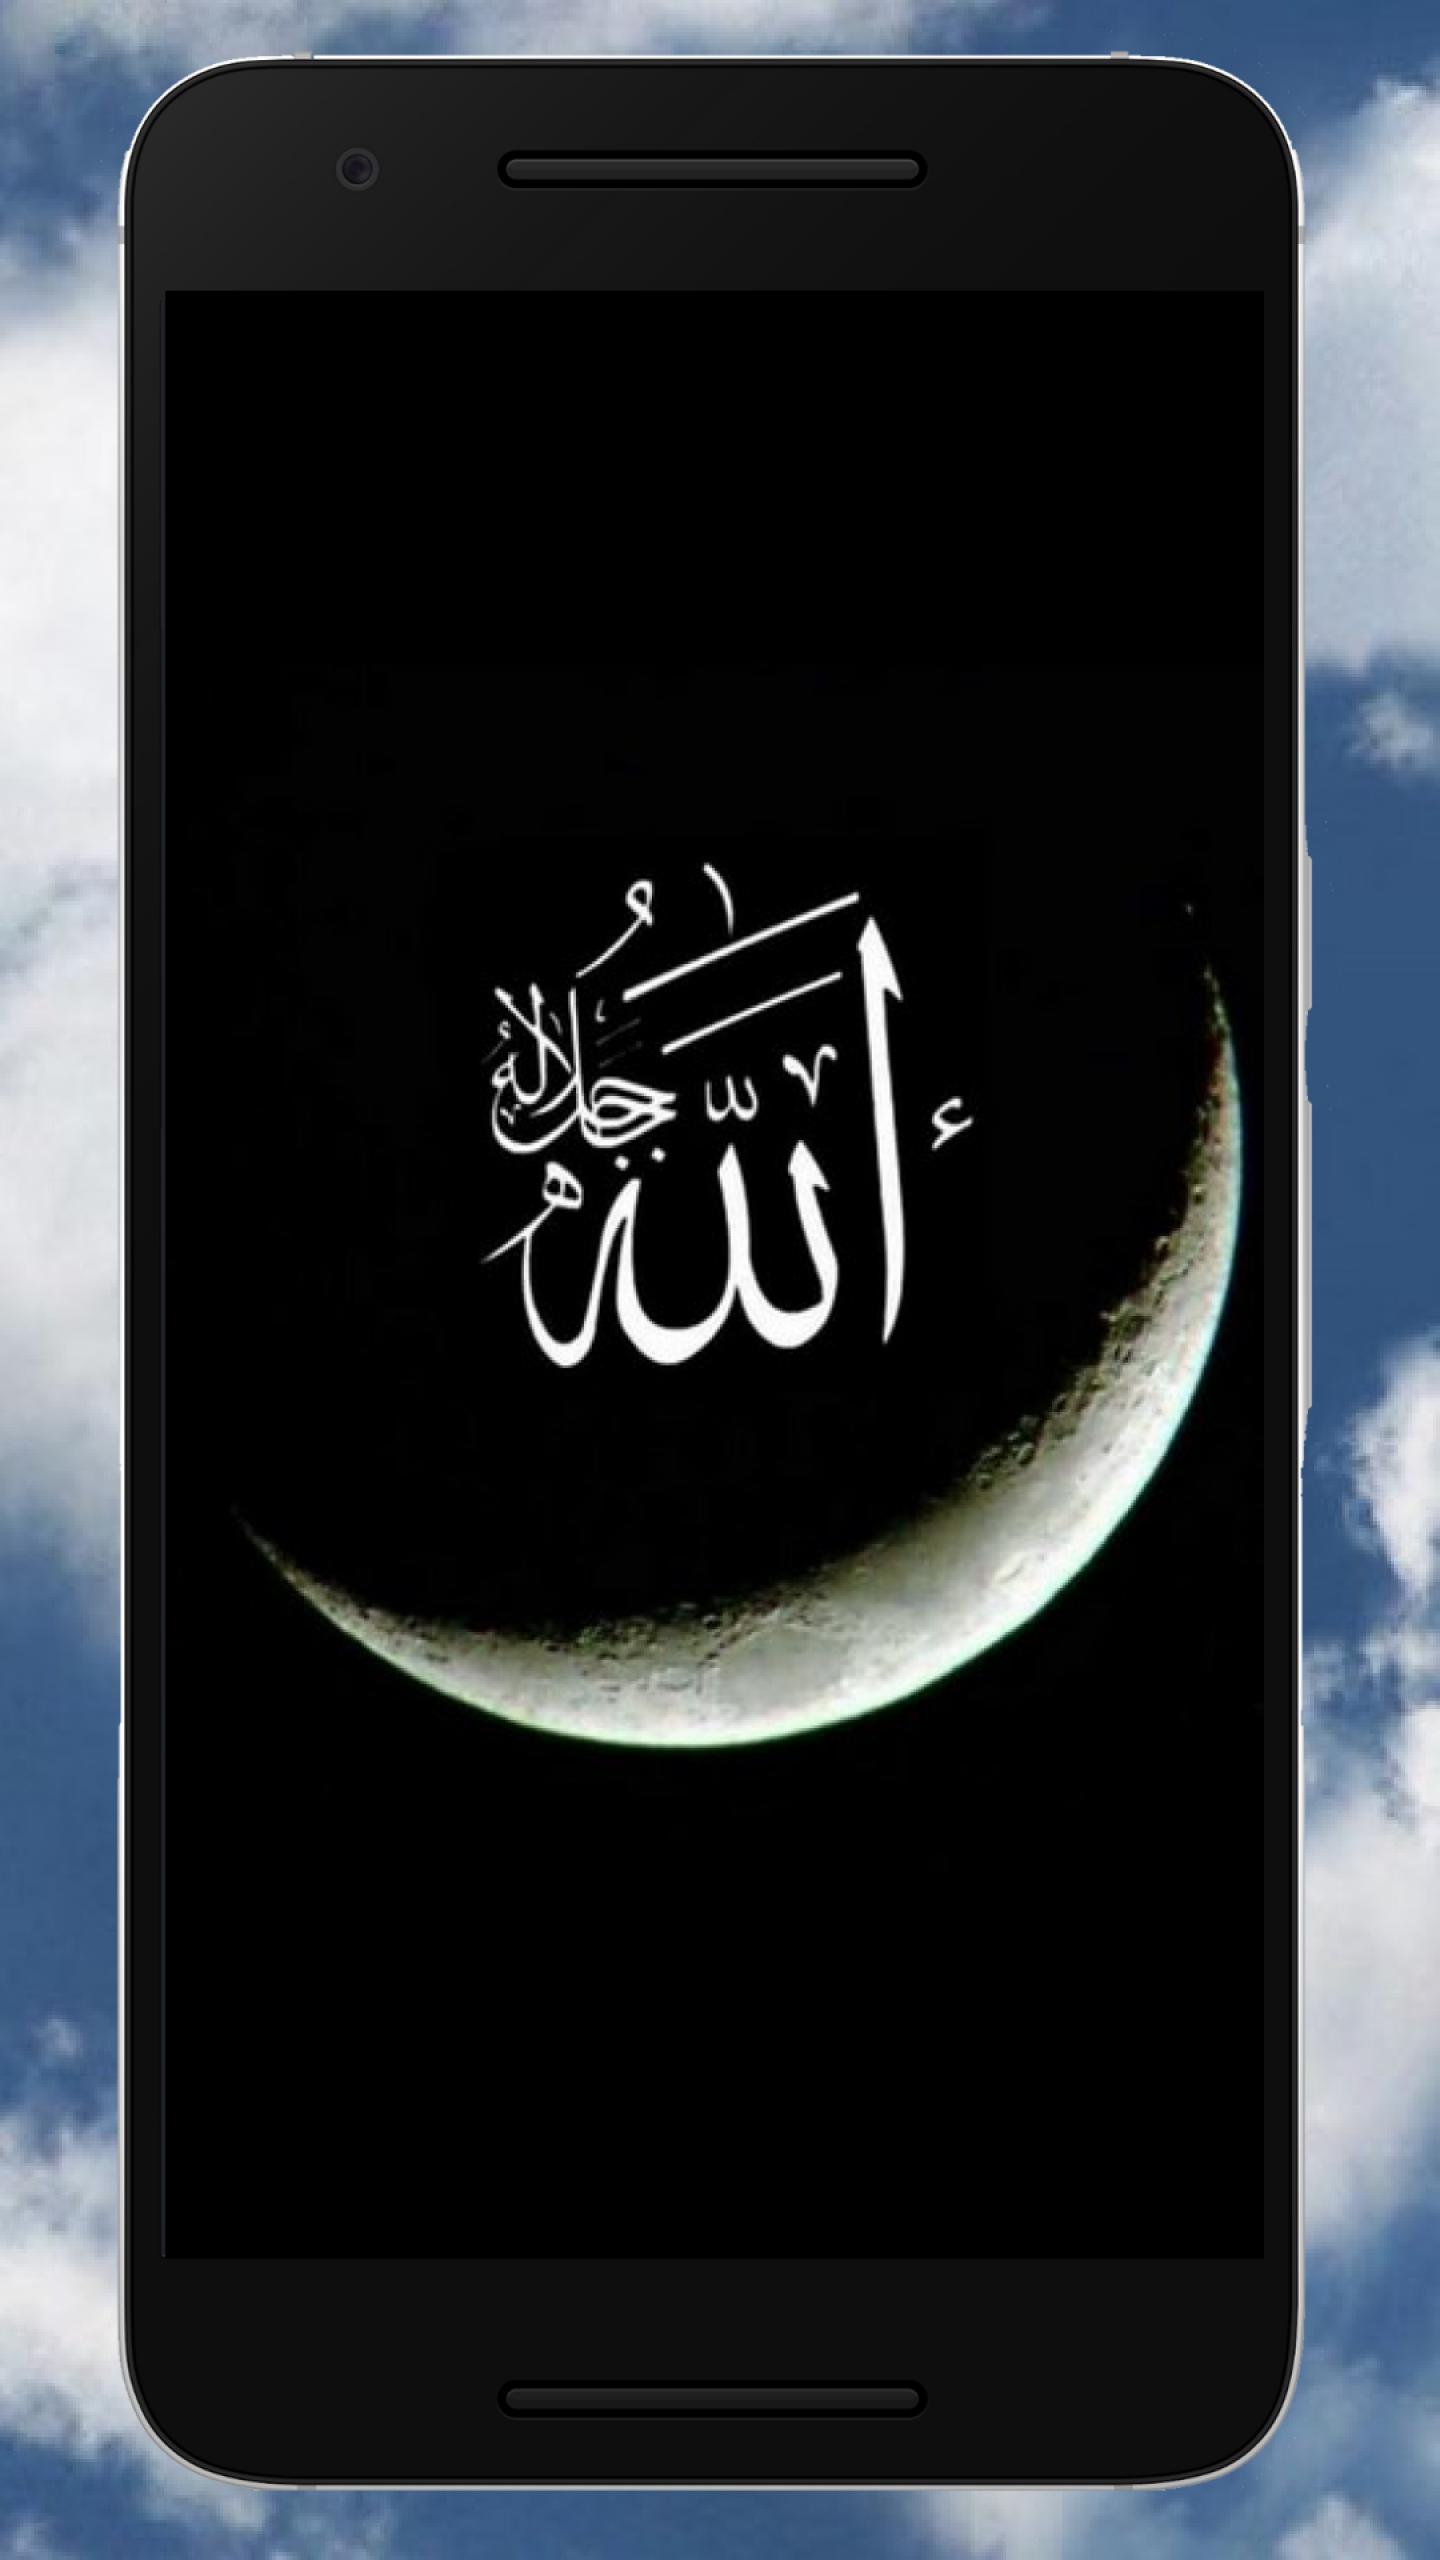  Islamic  Allah Wallpaper  for Free for Android  APK Download